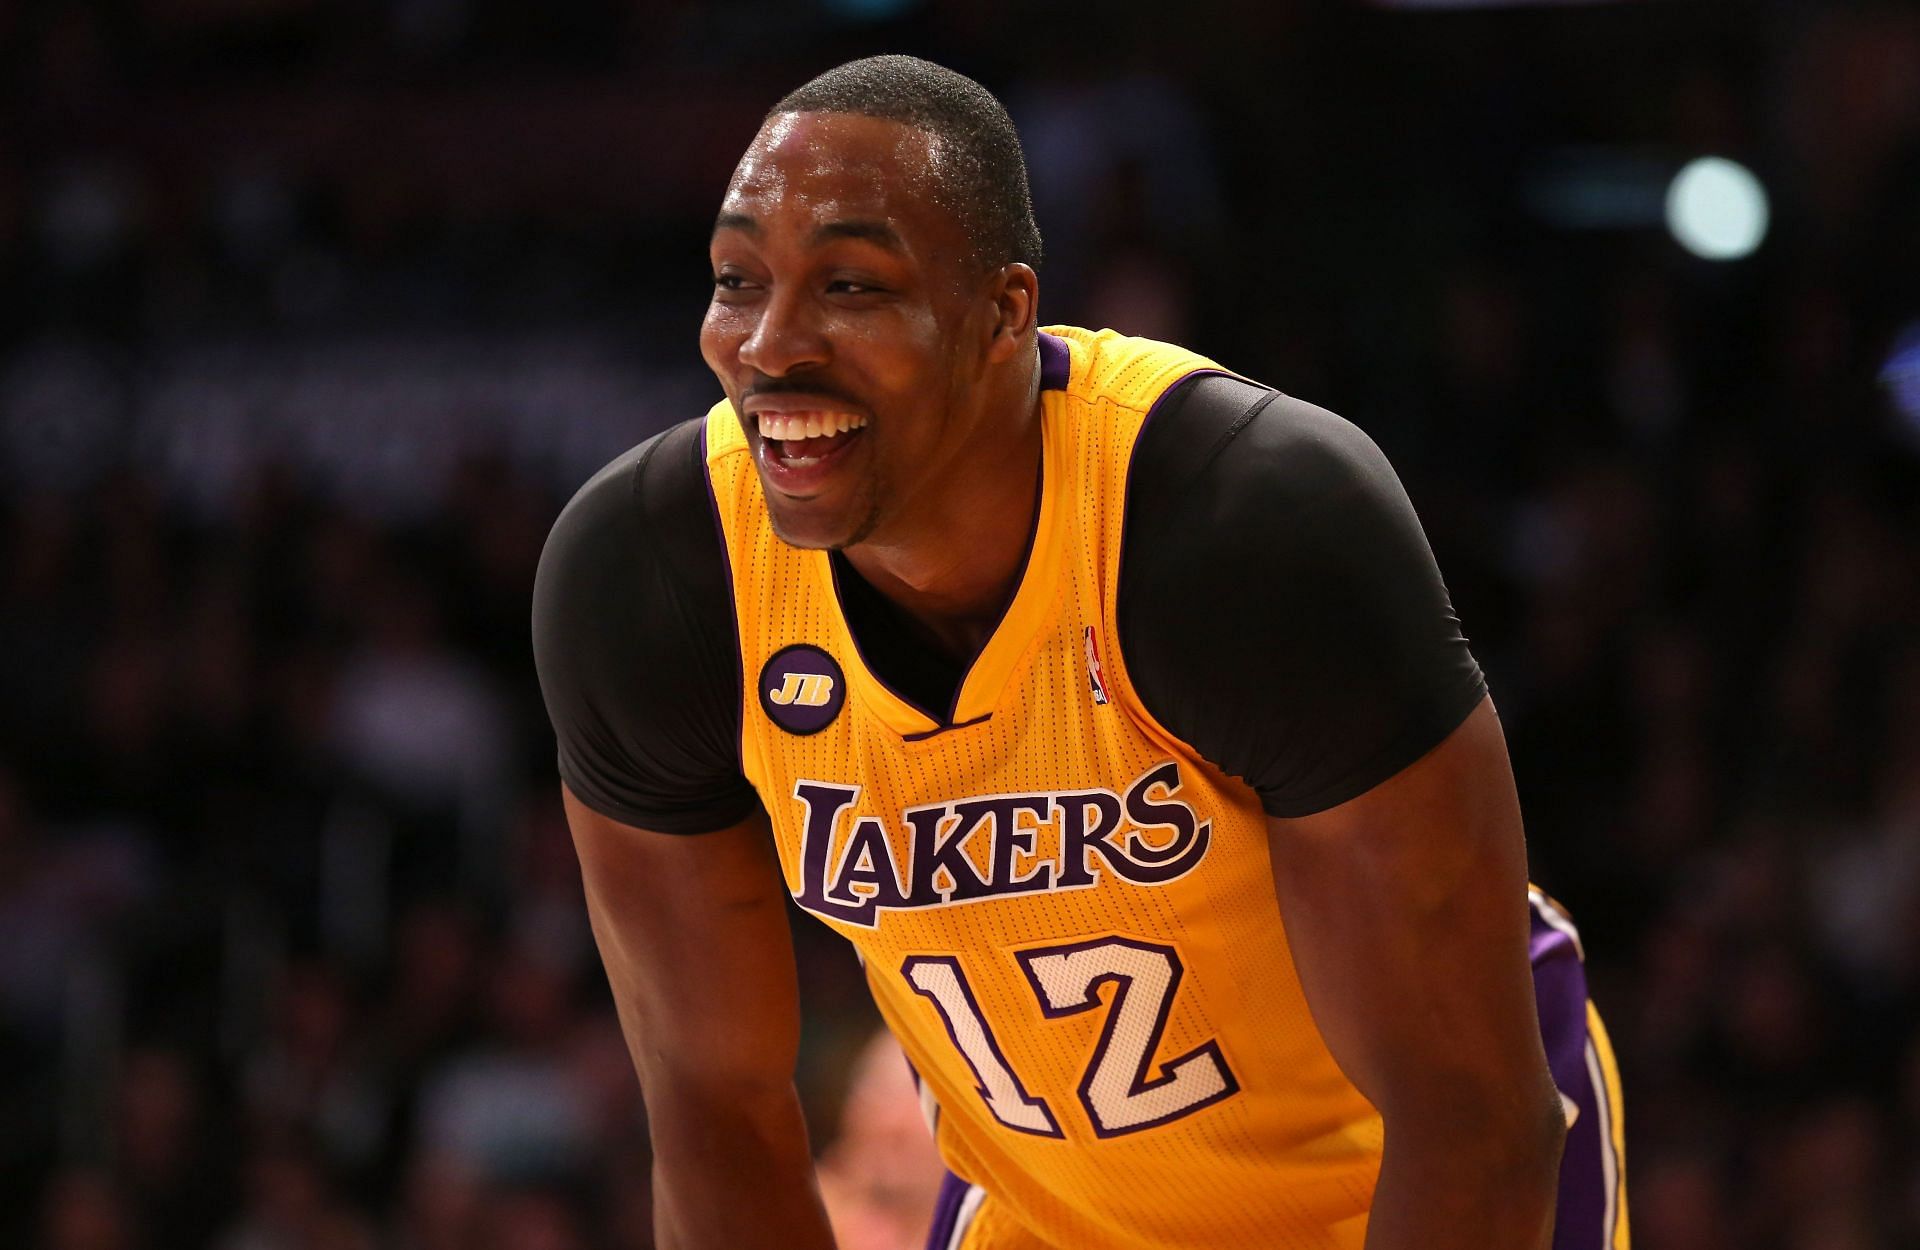 Dwight Howard spent a controversial, injury-laden season with the Lakers in 2012-13.